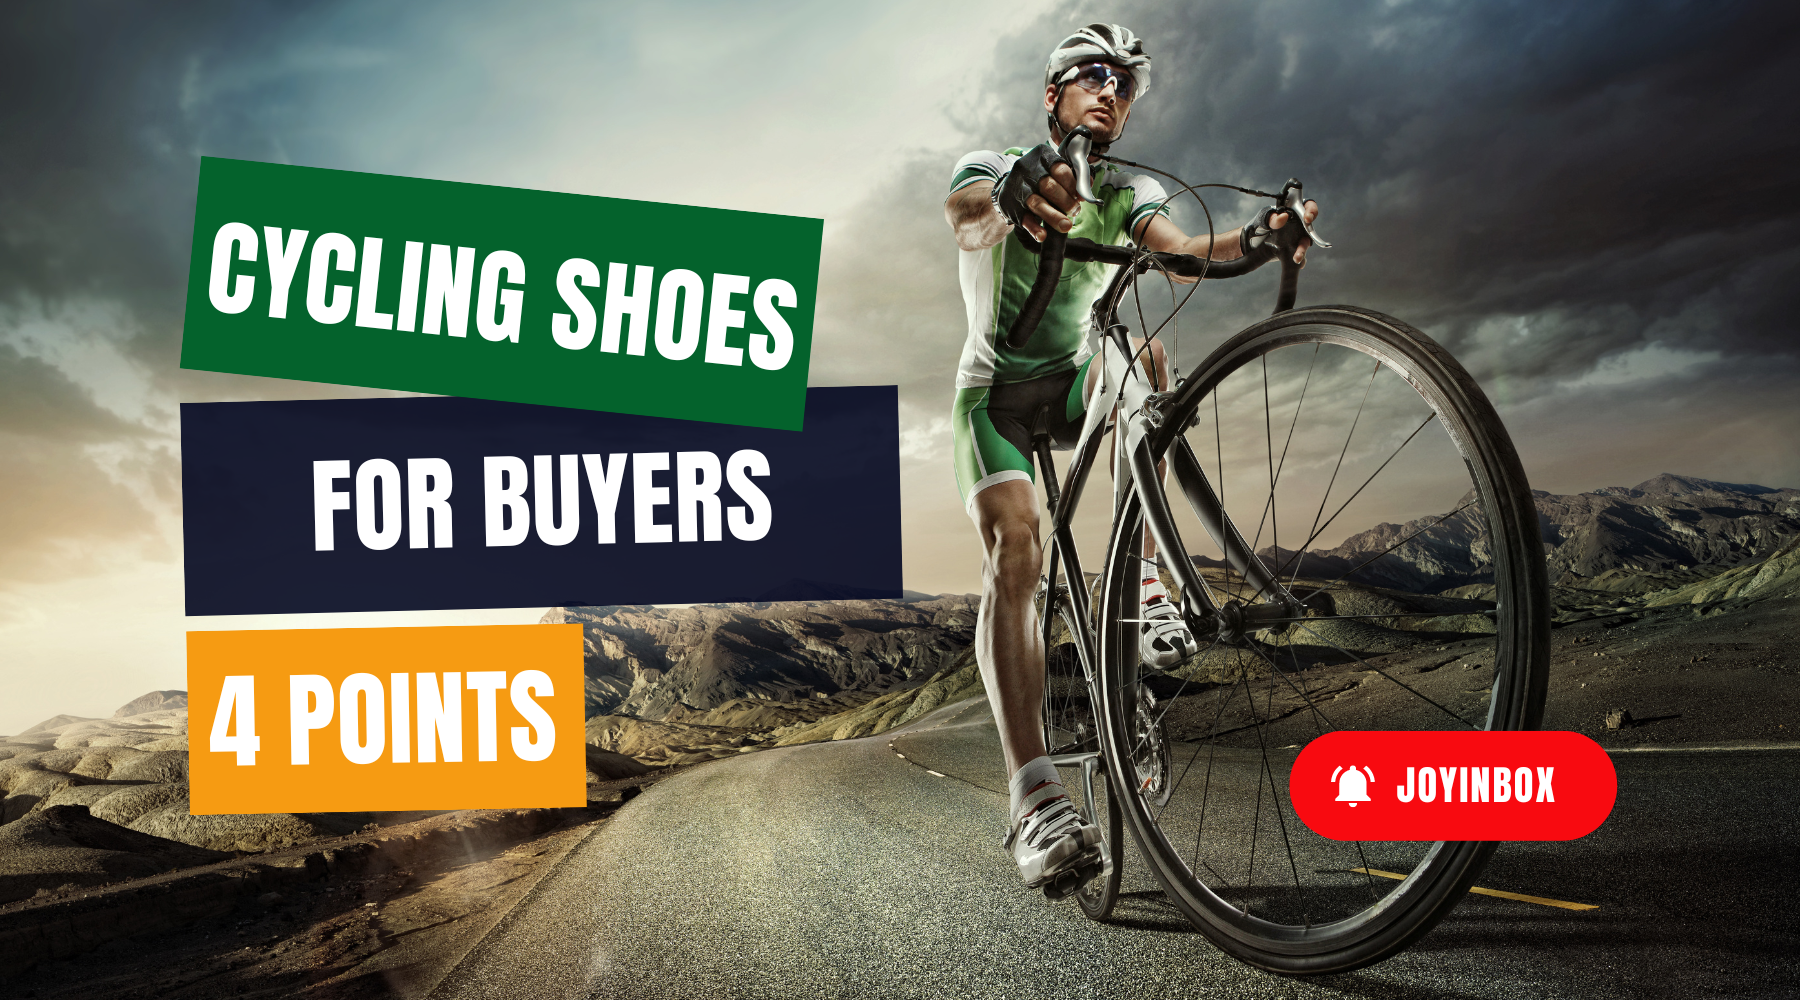 Why Do You Need Cycling Shoes?